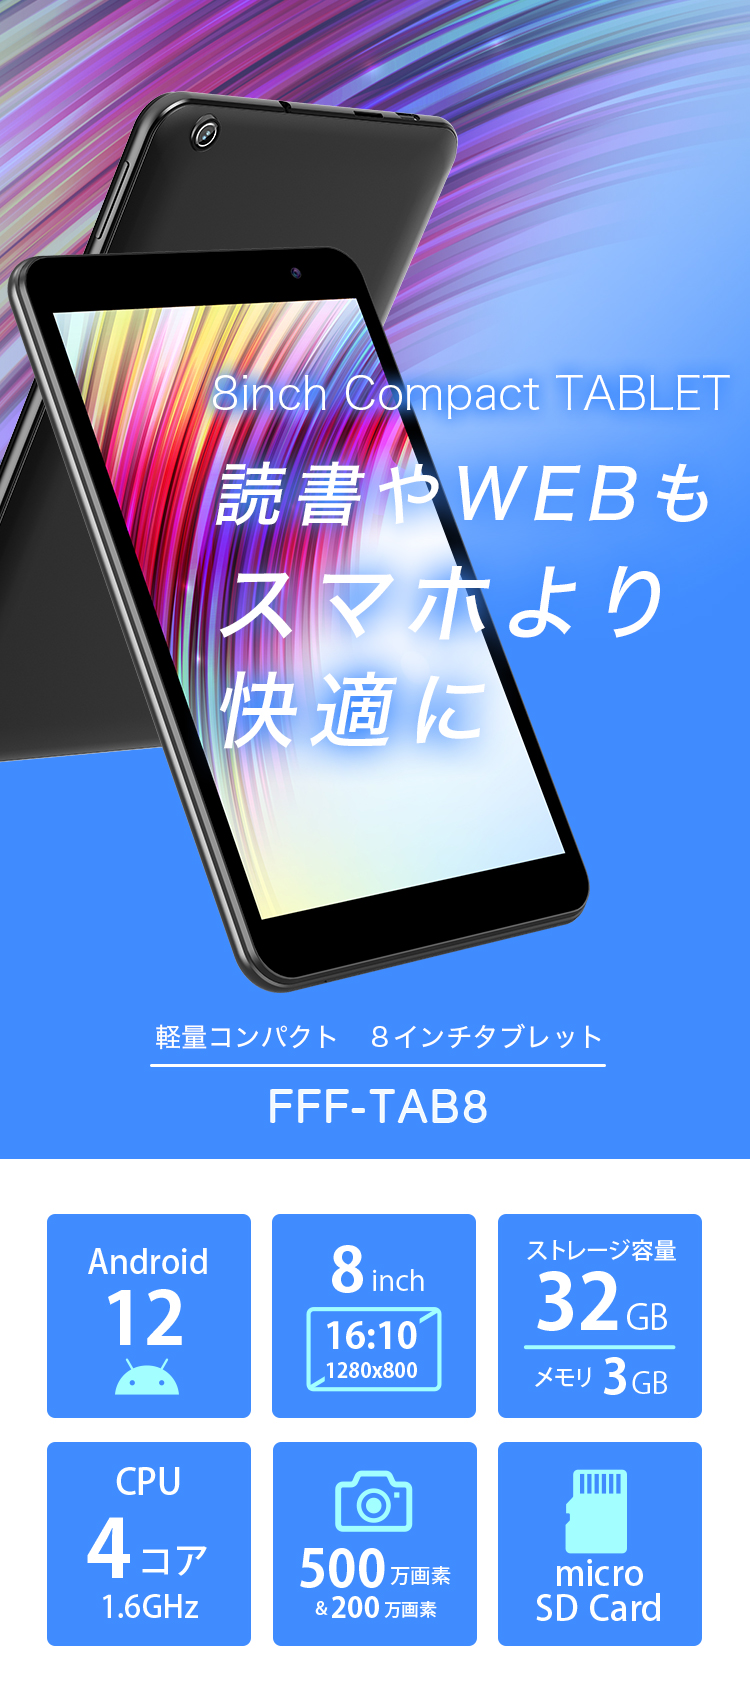 Android12 8インチタブレット FFF-TAB8 | FFF SMART LIFE CONNECTED